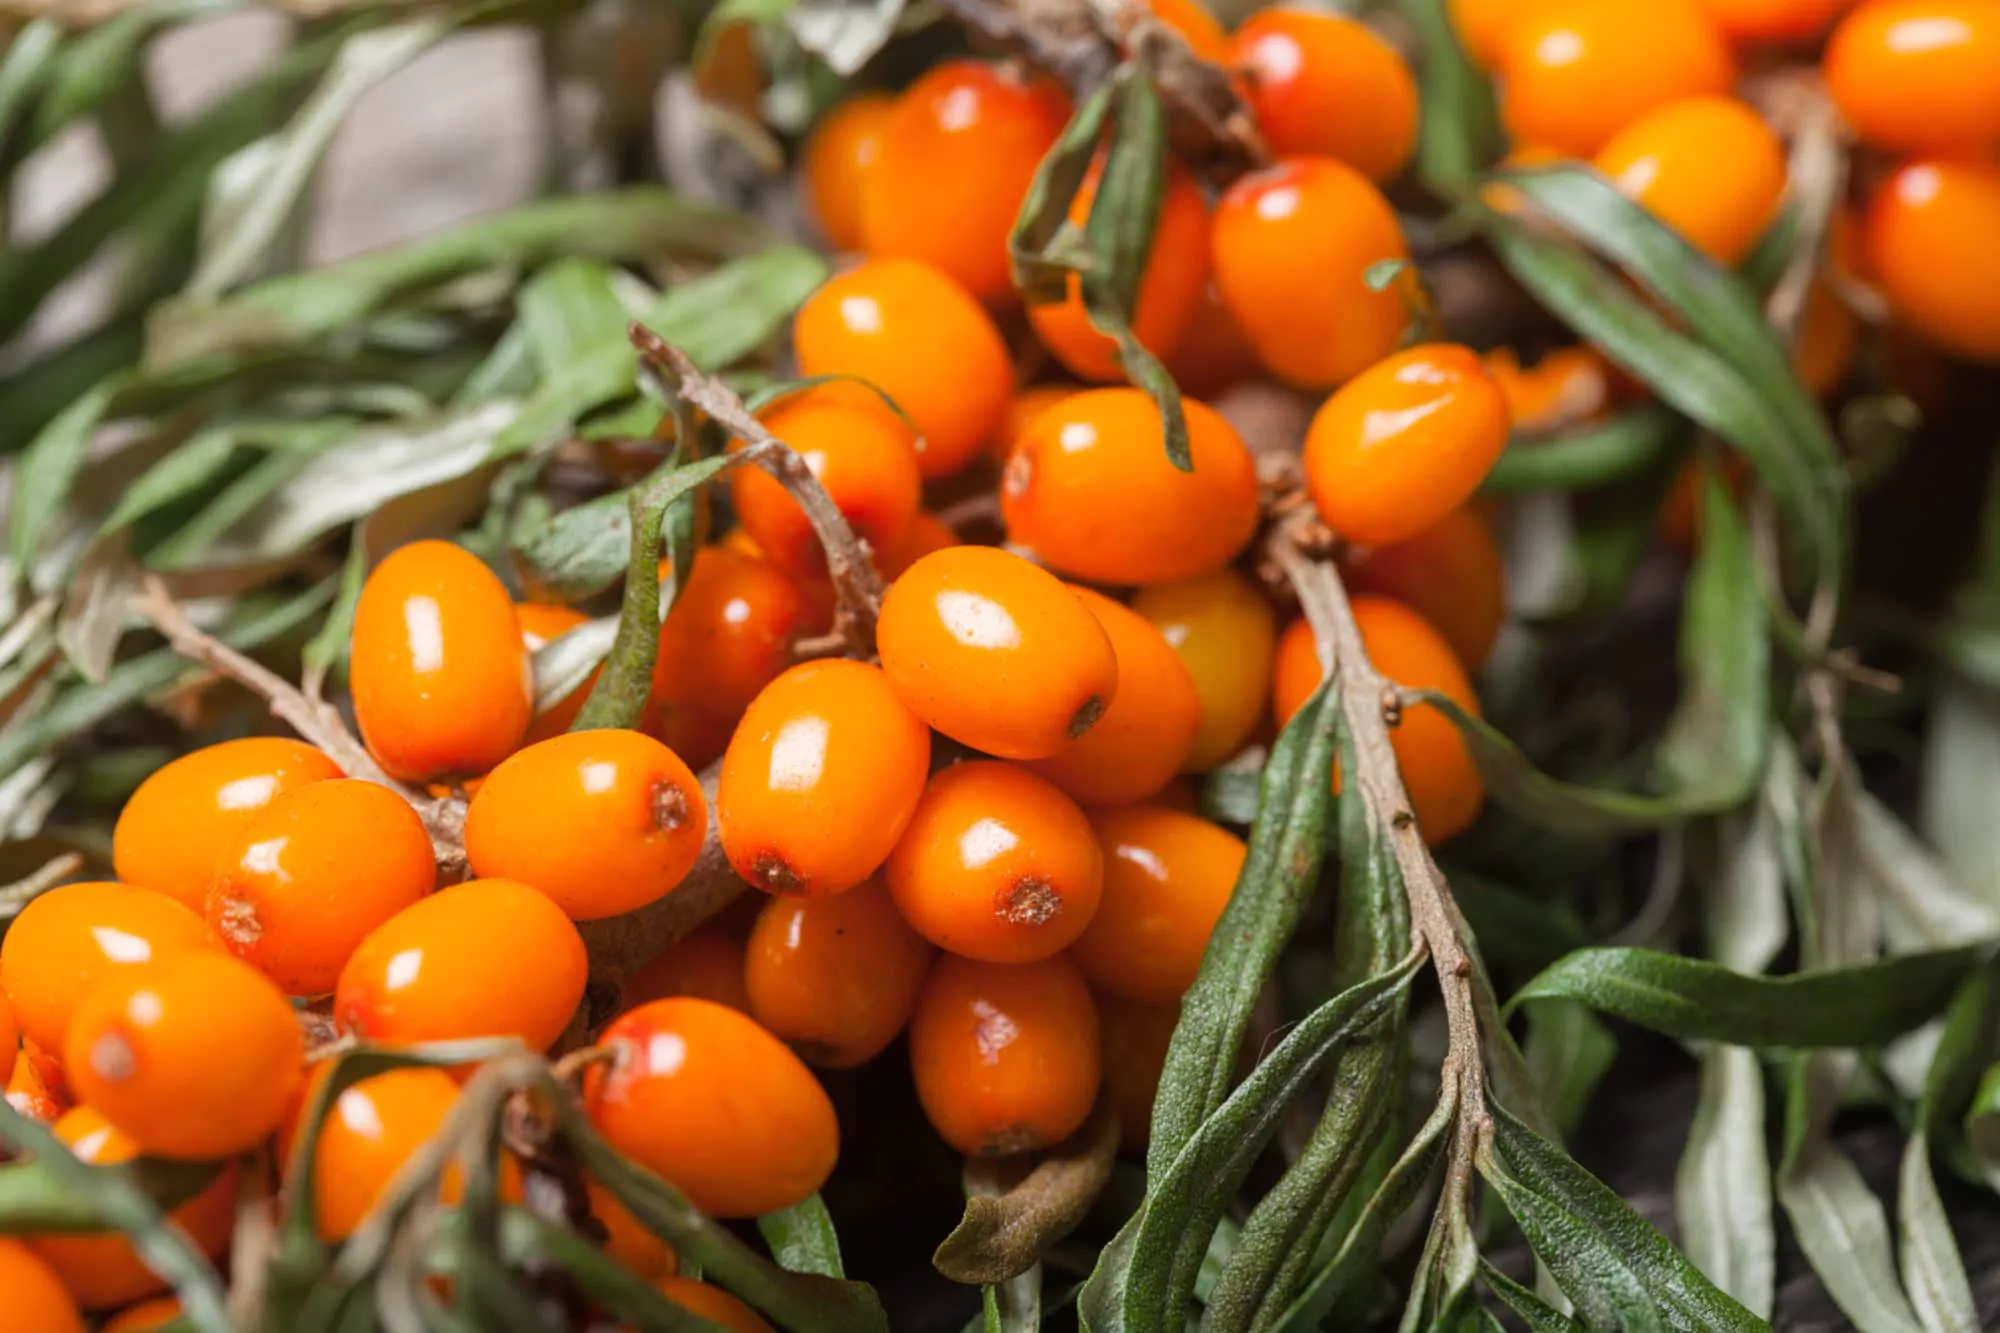 You can still use Sea Buckthorn oil for clogged pores if you combine it with other high linoleic acid oils.